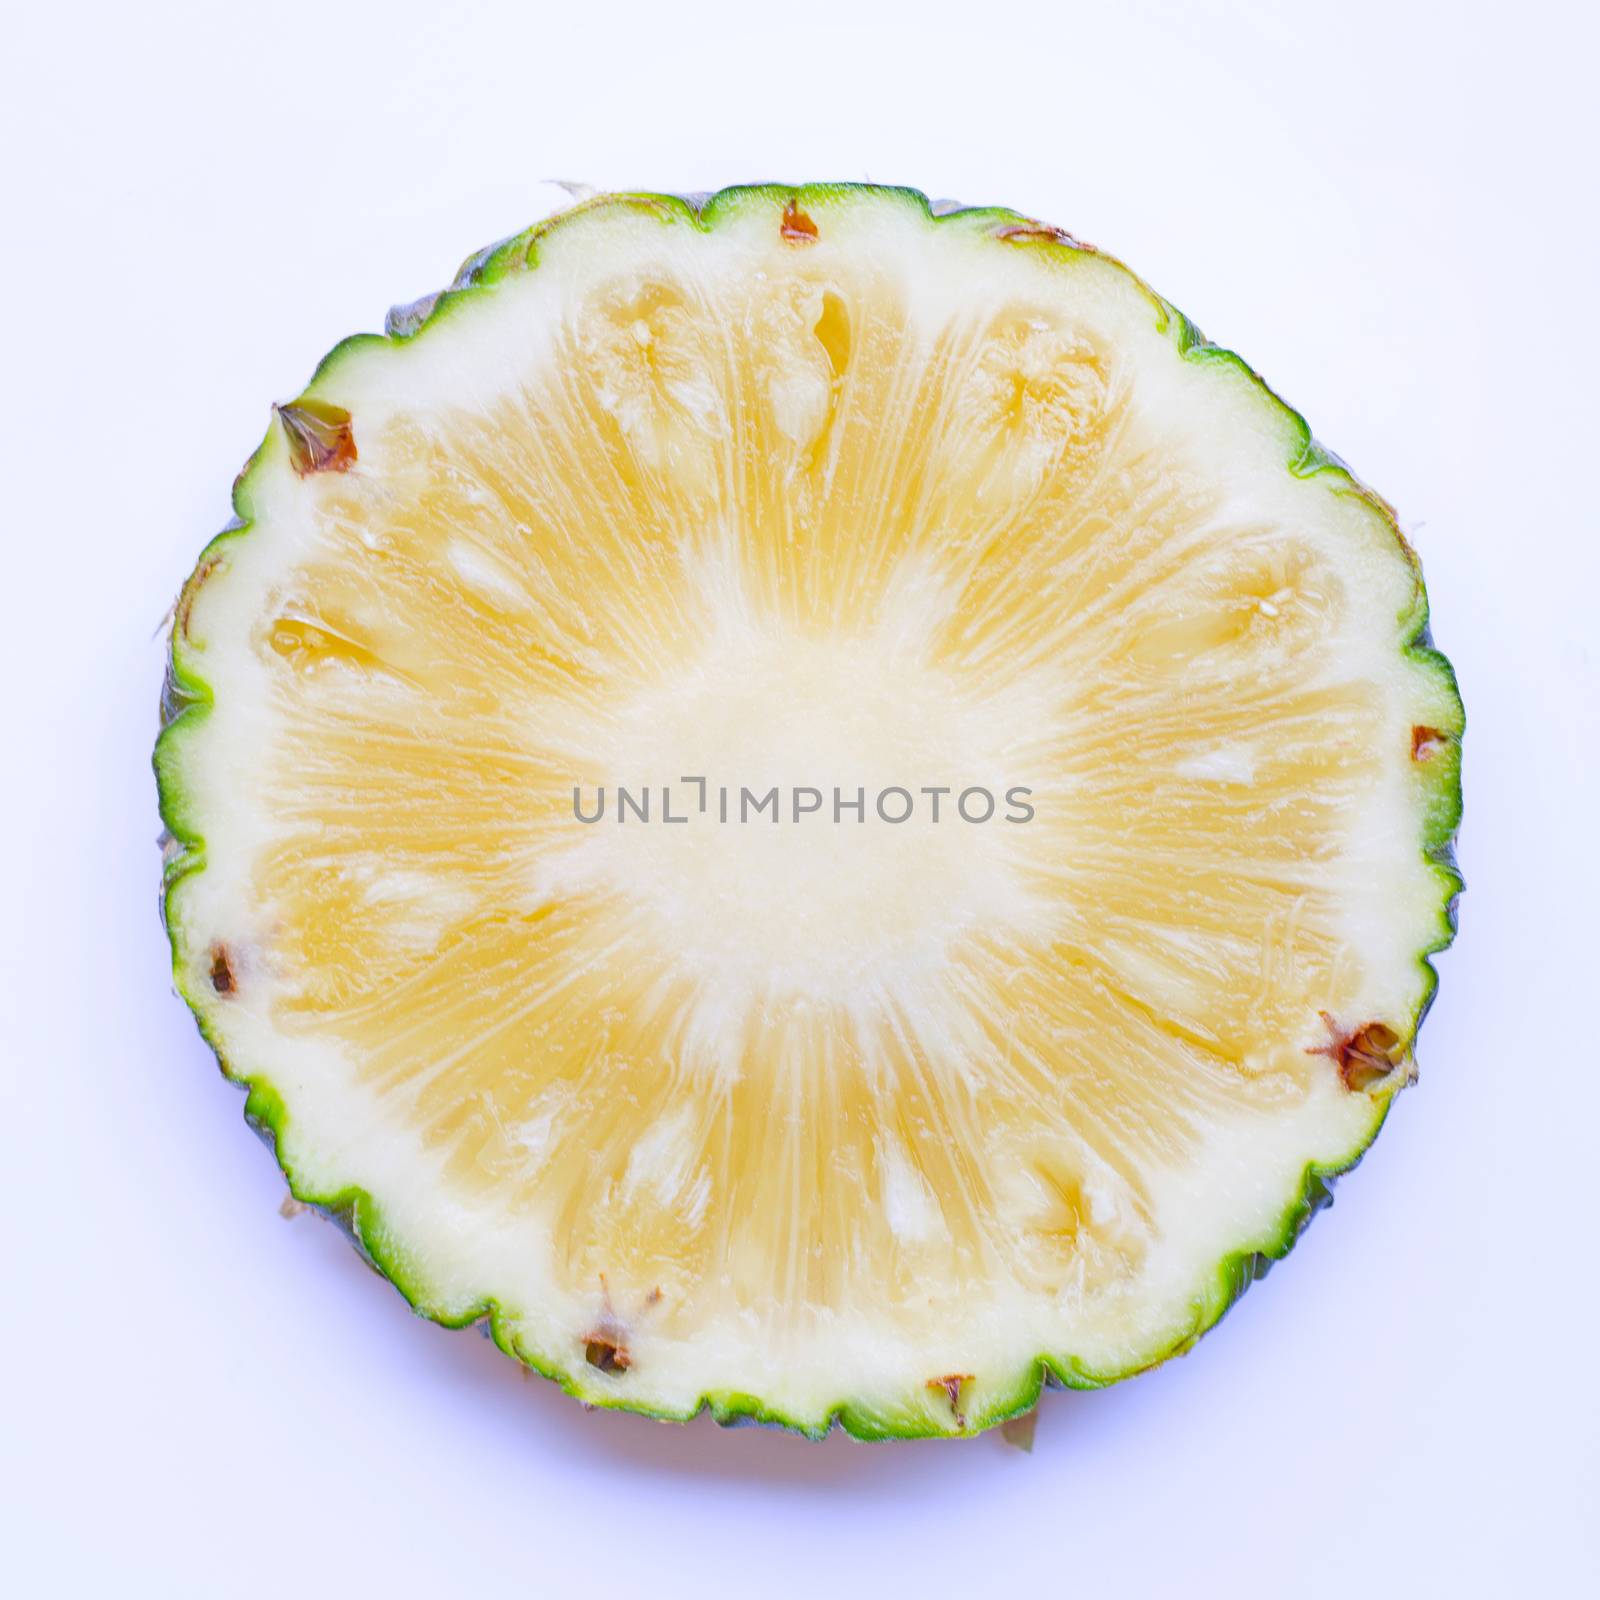 Pineapple slice on white background. by Bowonpat